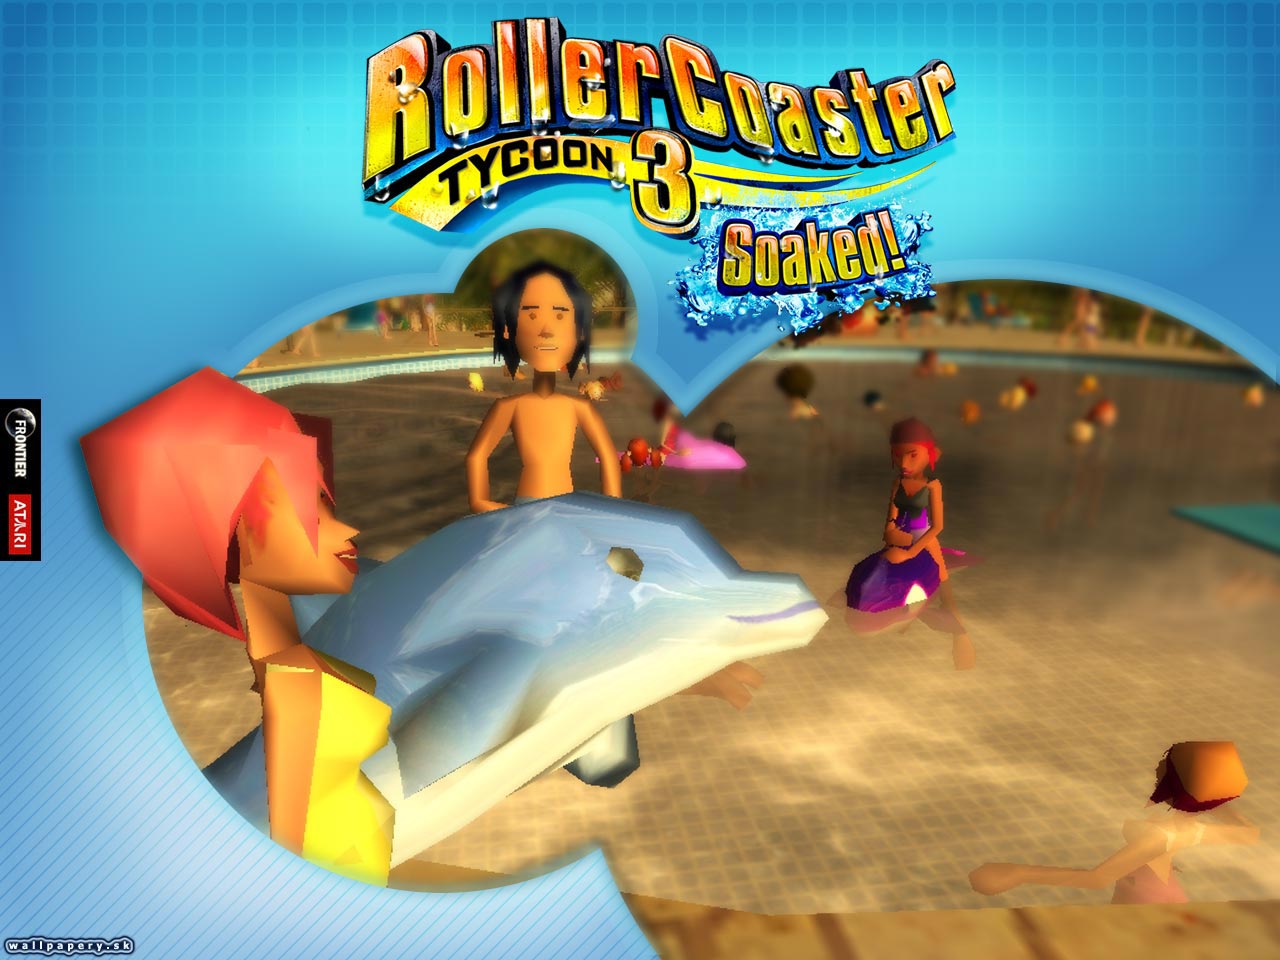 RollerCoaster Tycoon 3: Soaked! - wallpaper 4